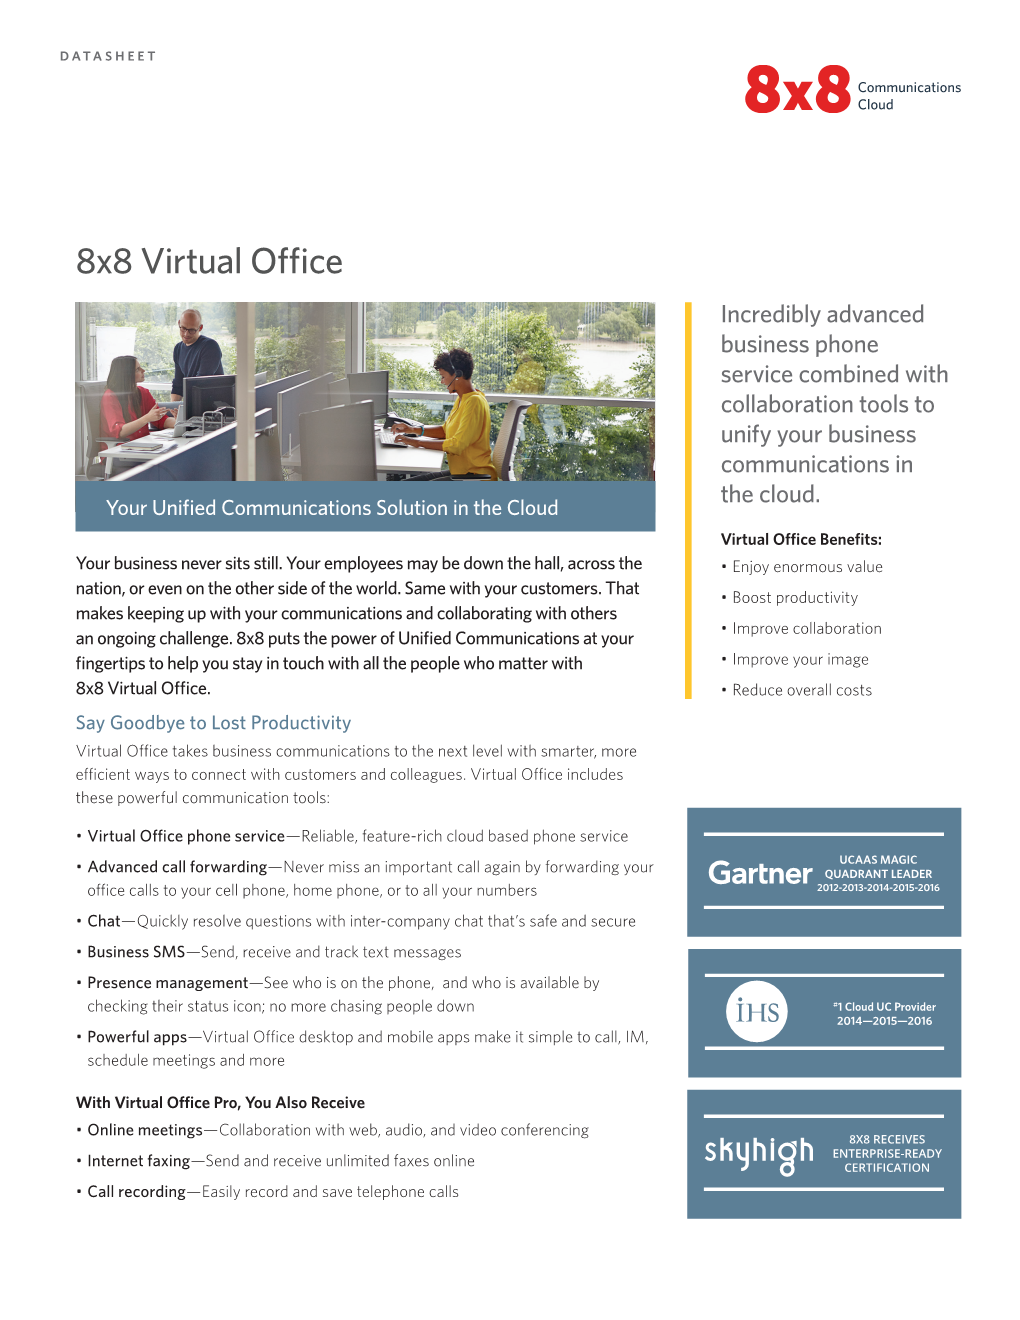 8X8 Virtual Office Incredibly Advanced Business Phone Service Combined with Collaboration Tools to Unify Your Business Communications in the Cloud